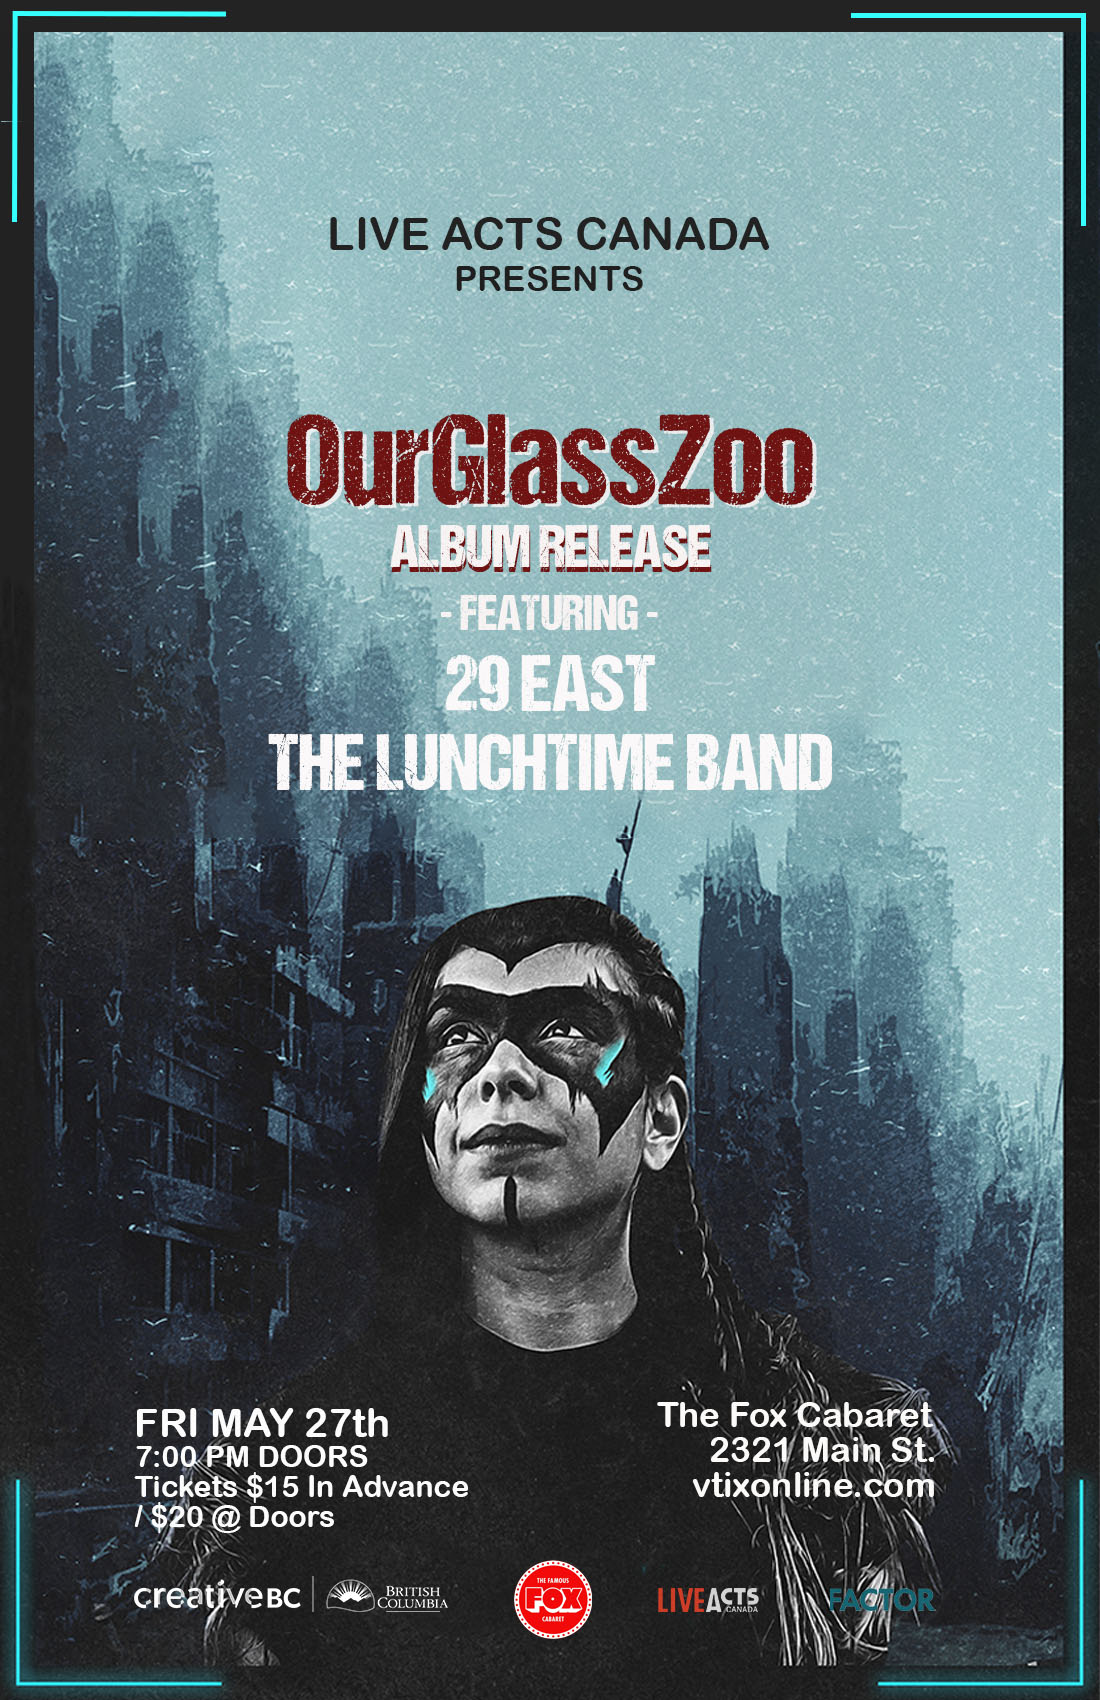 OurGlassZoo Album Release with Special Guests 29 East + The Lunchtime Band